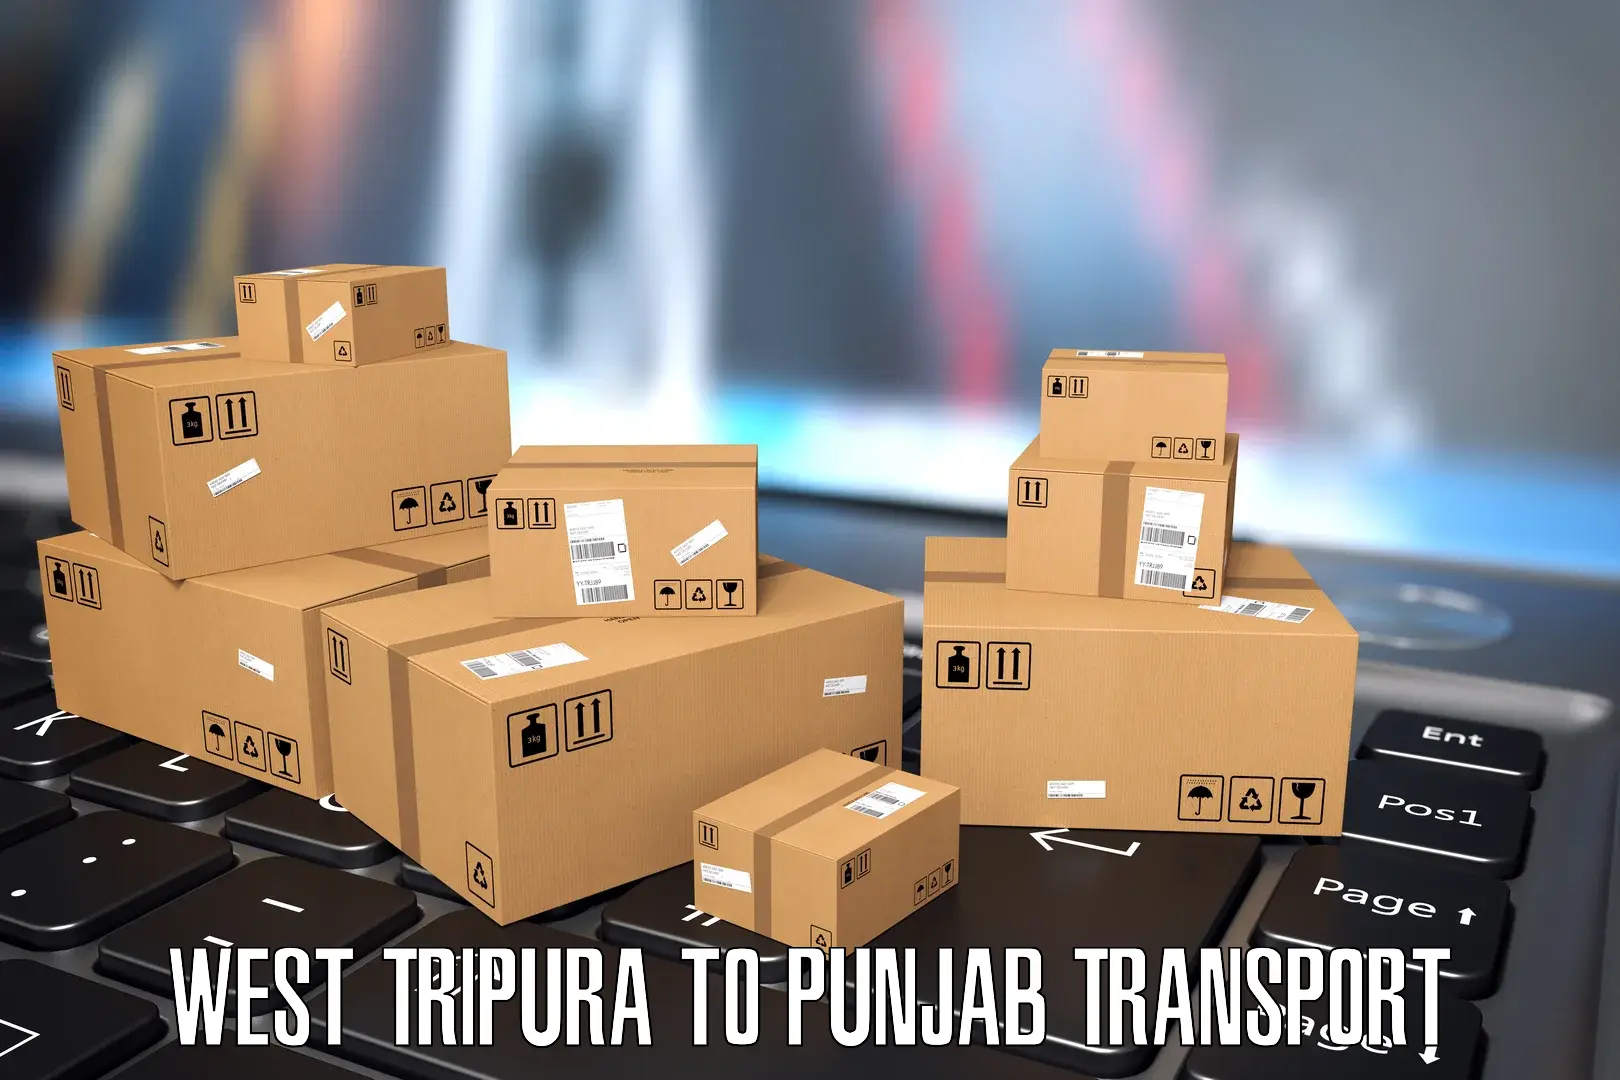 Container transport service West Tripura to Muktsar